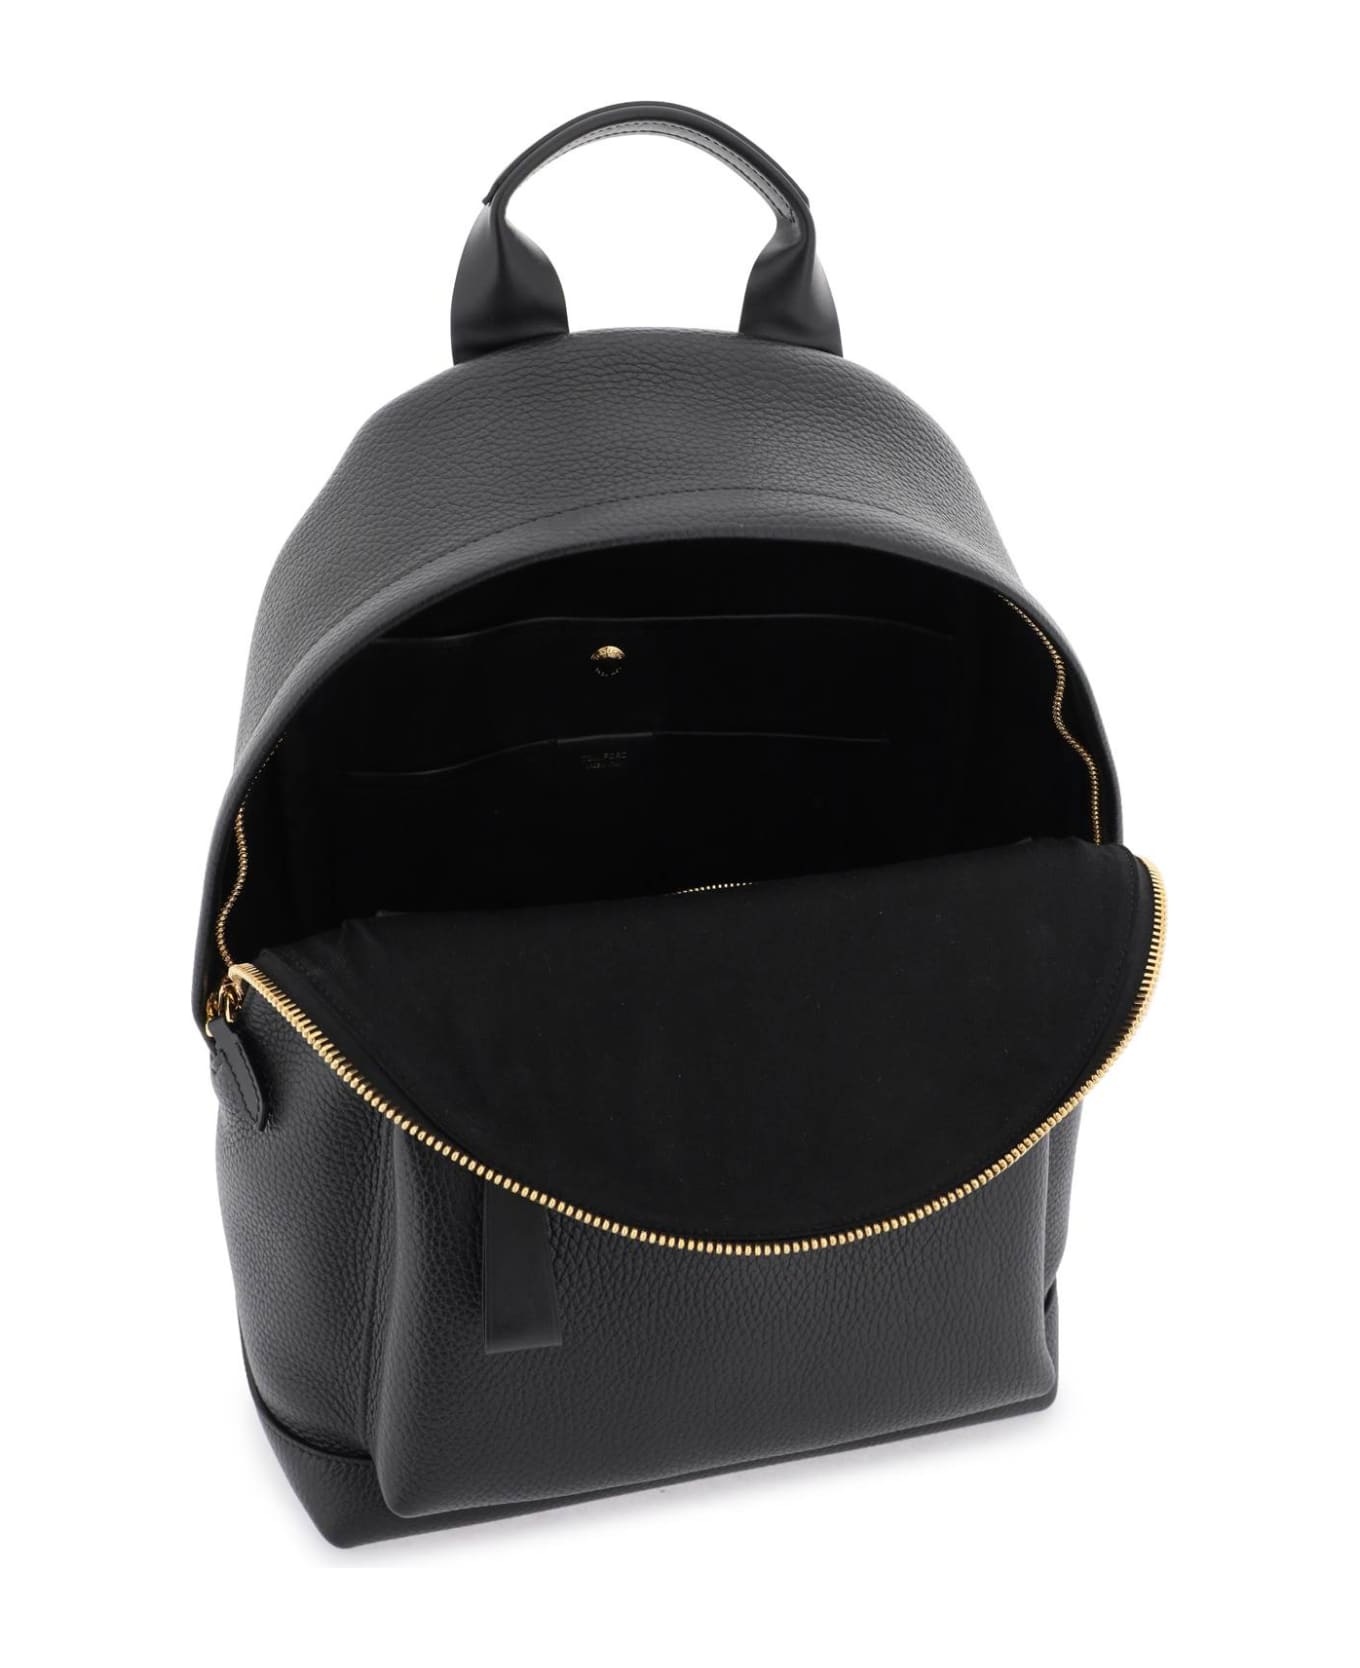 Tom Ford Grained Leather 'buckley' Backpack - Black